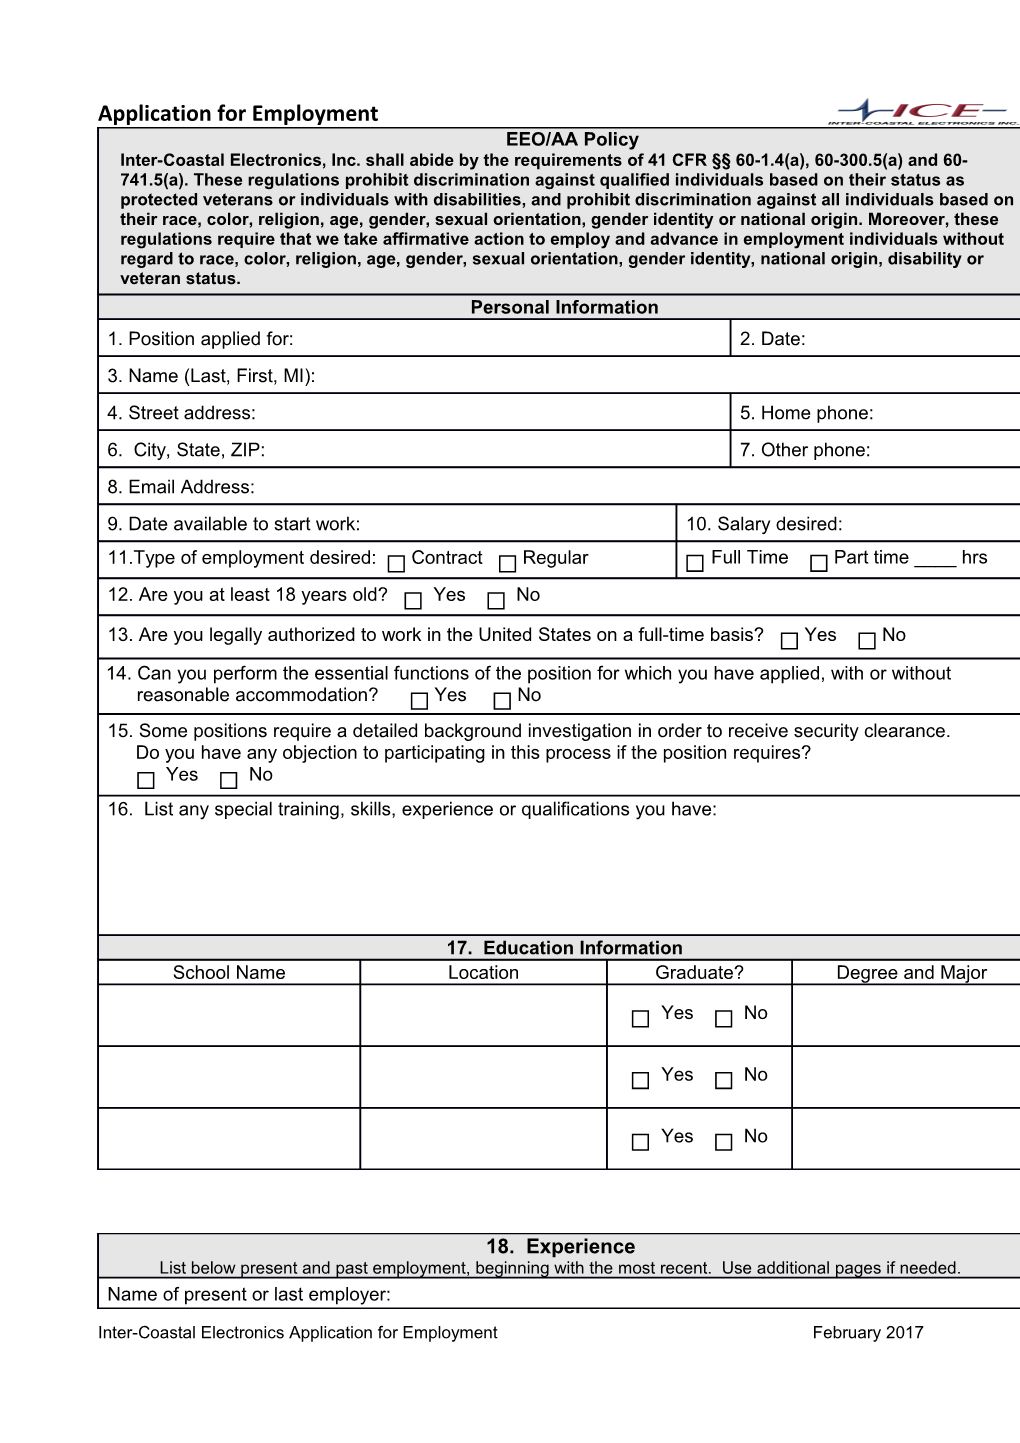 Application for Employment s9